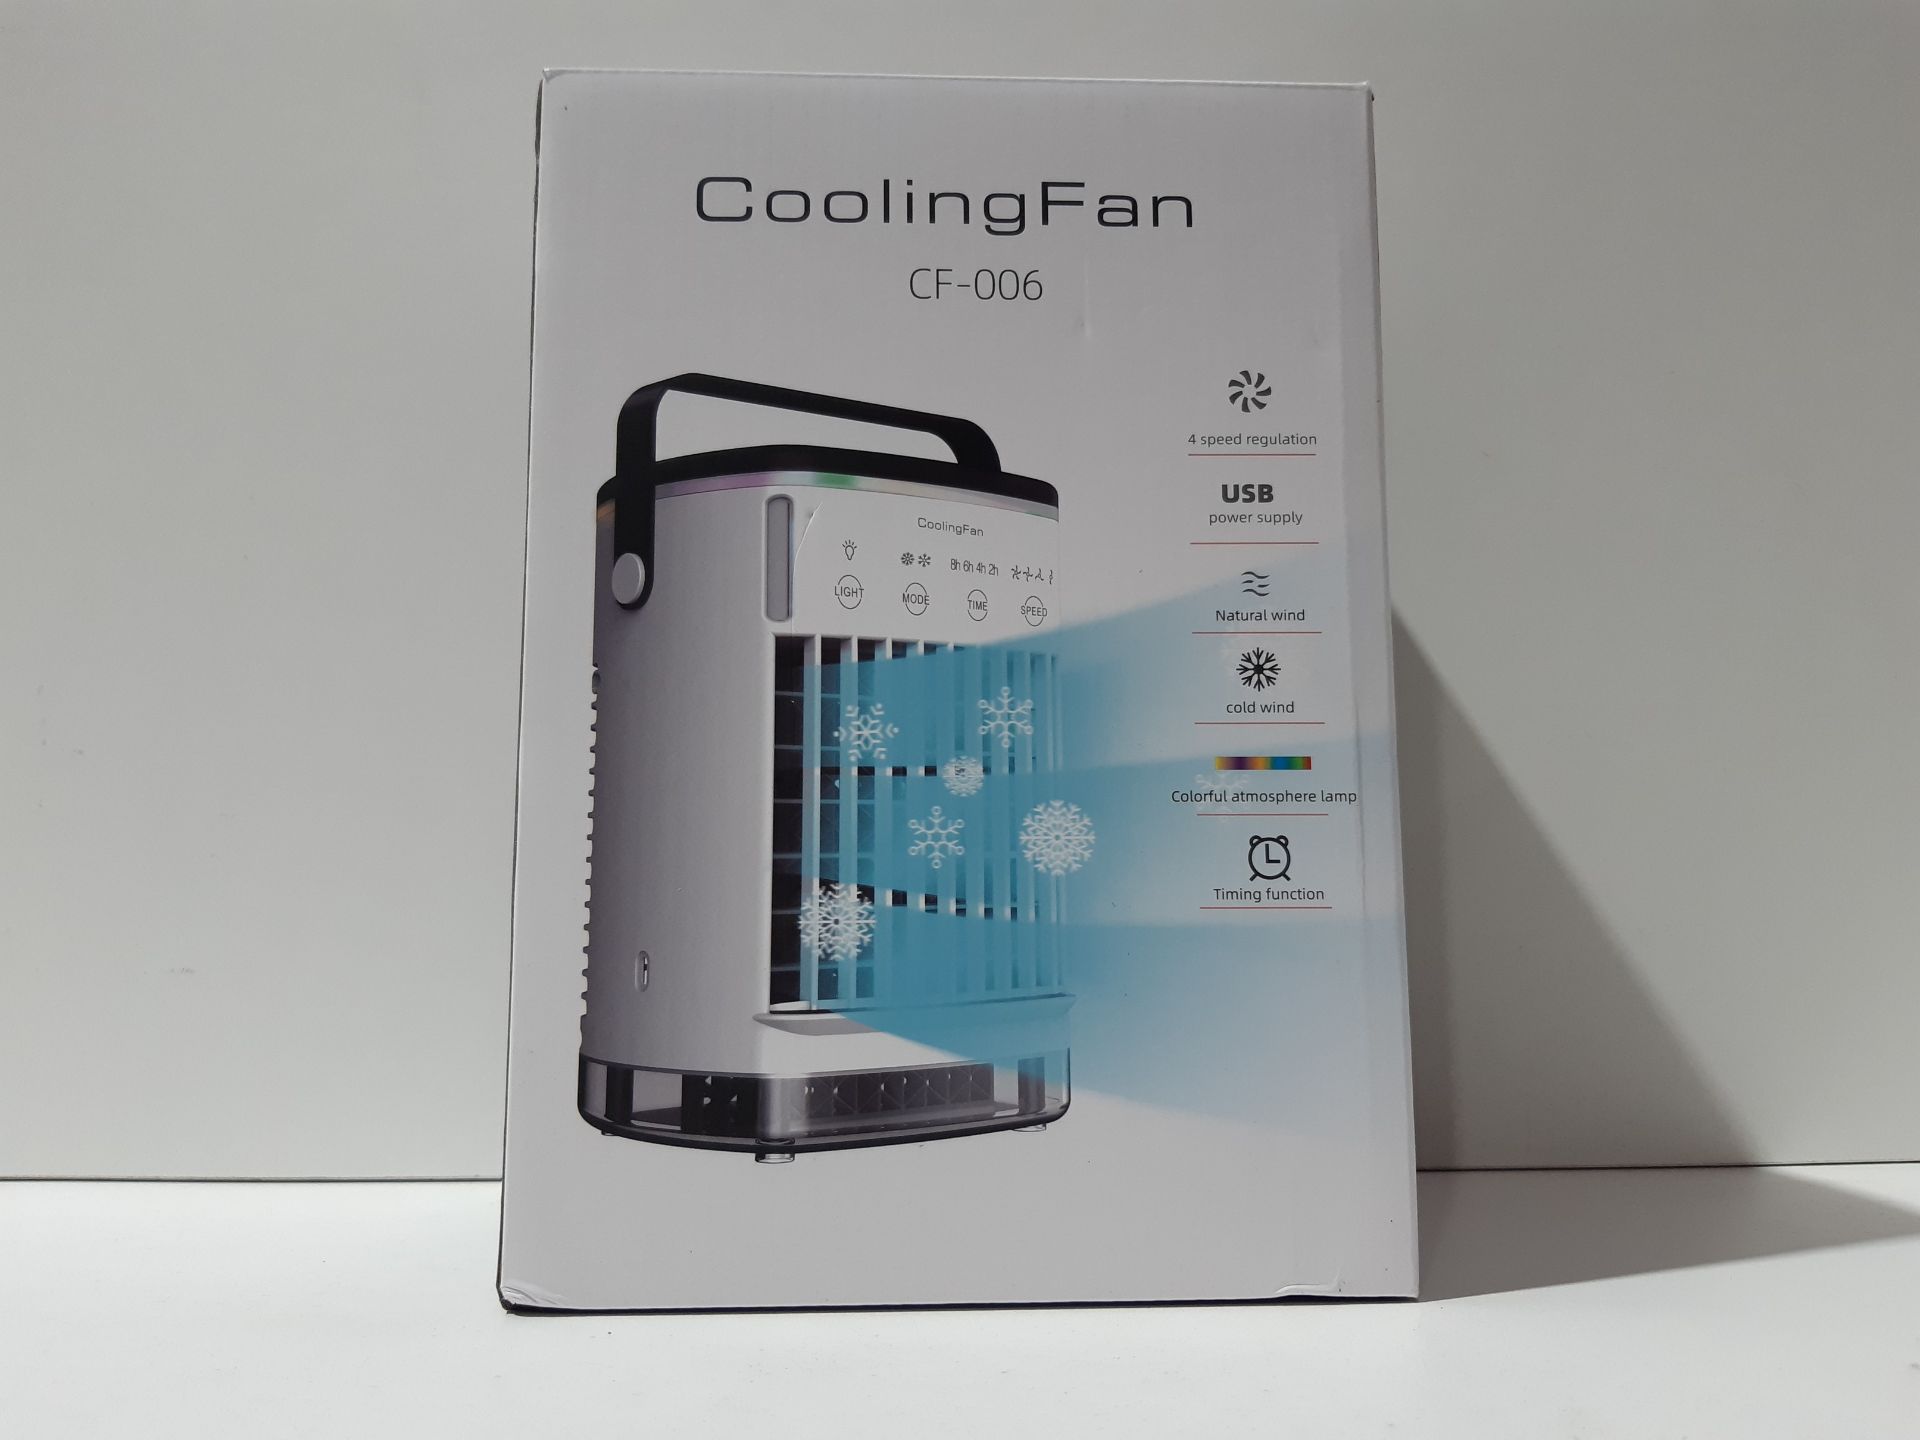 RRP £34.19 Portable Air Cooler - Image 2 of 2